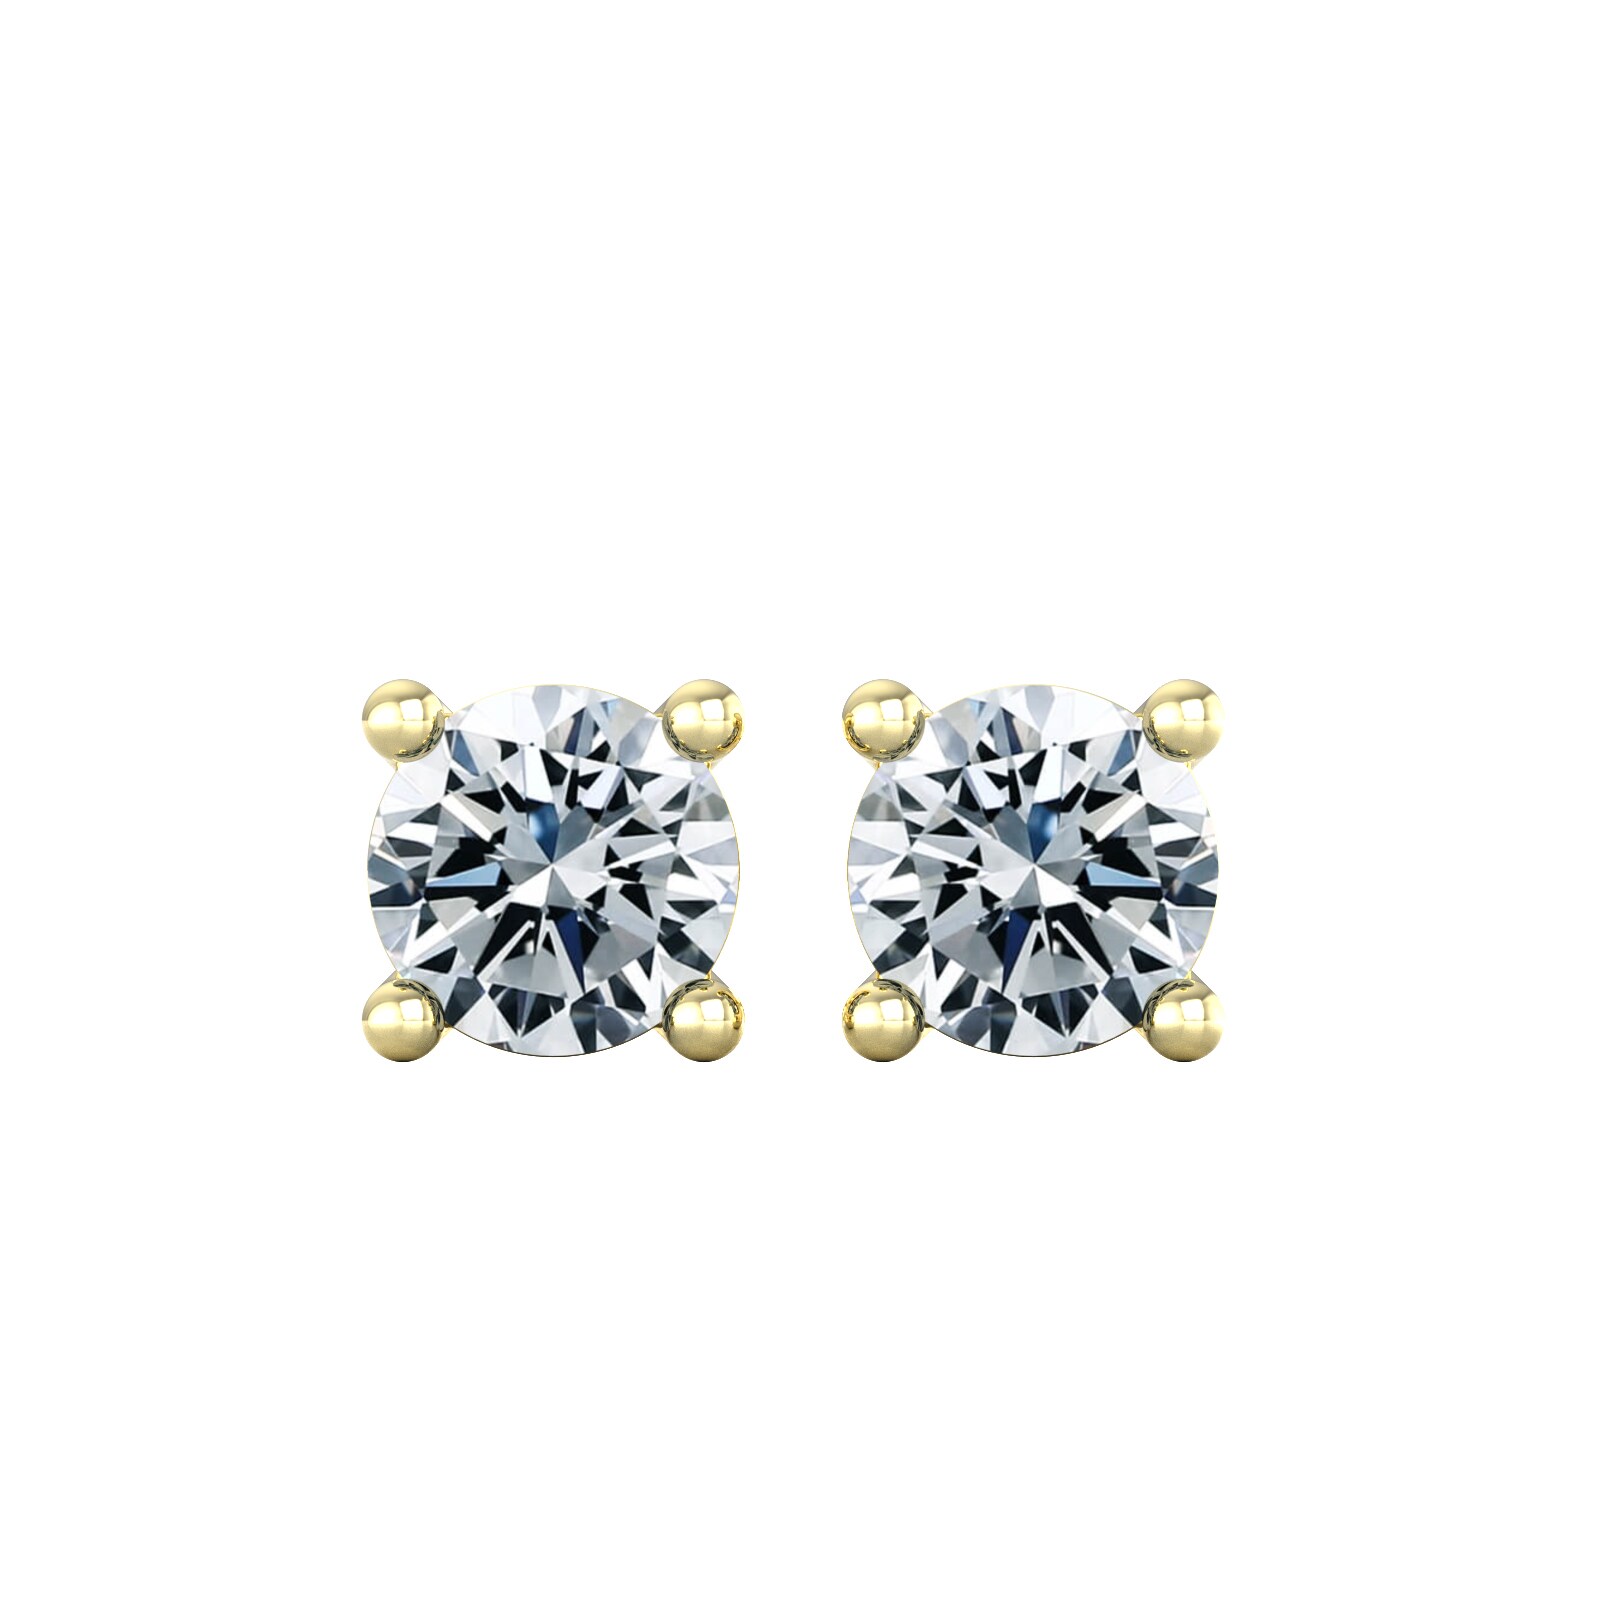 18ct Yellow Gold 0.80cttw Solitaire Diamond Stud Earrings